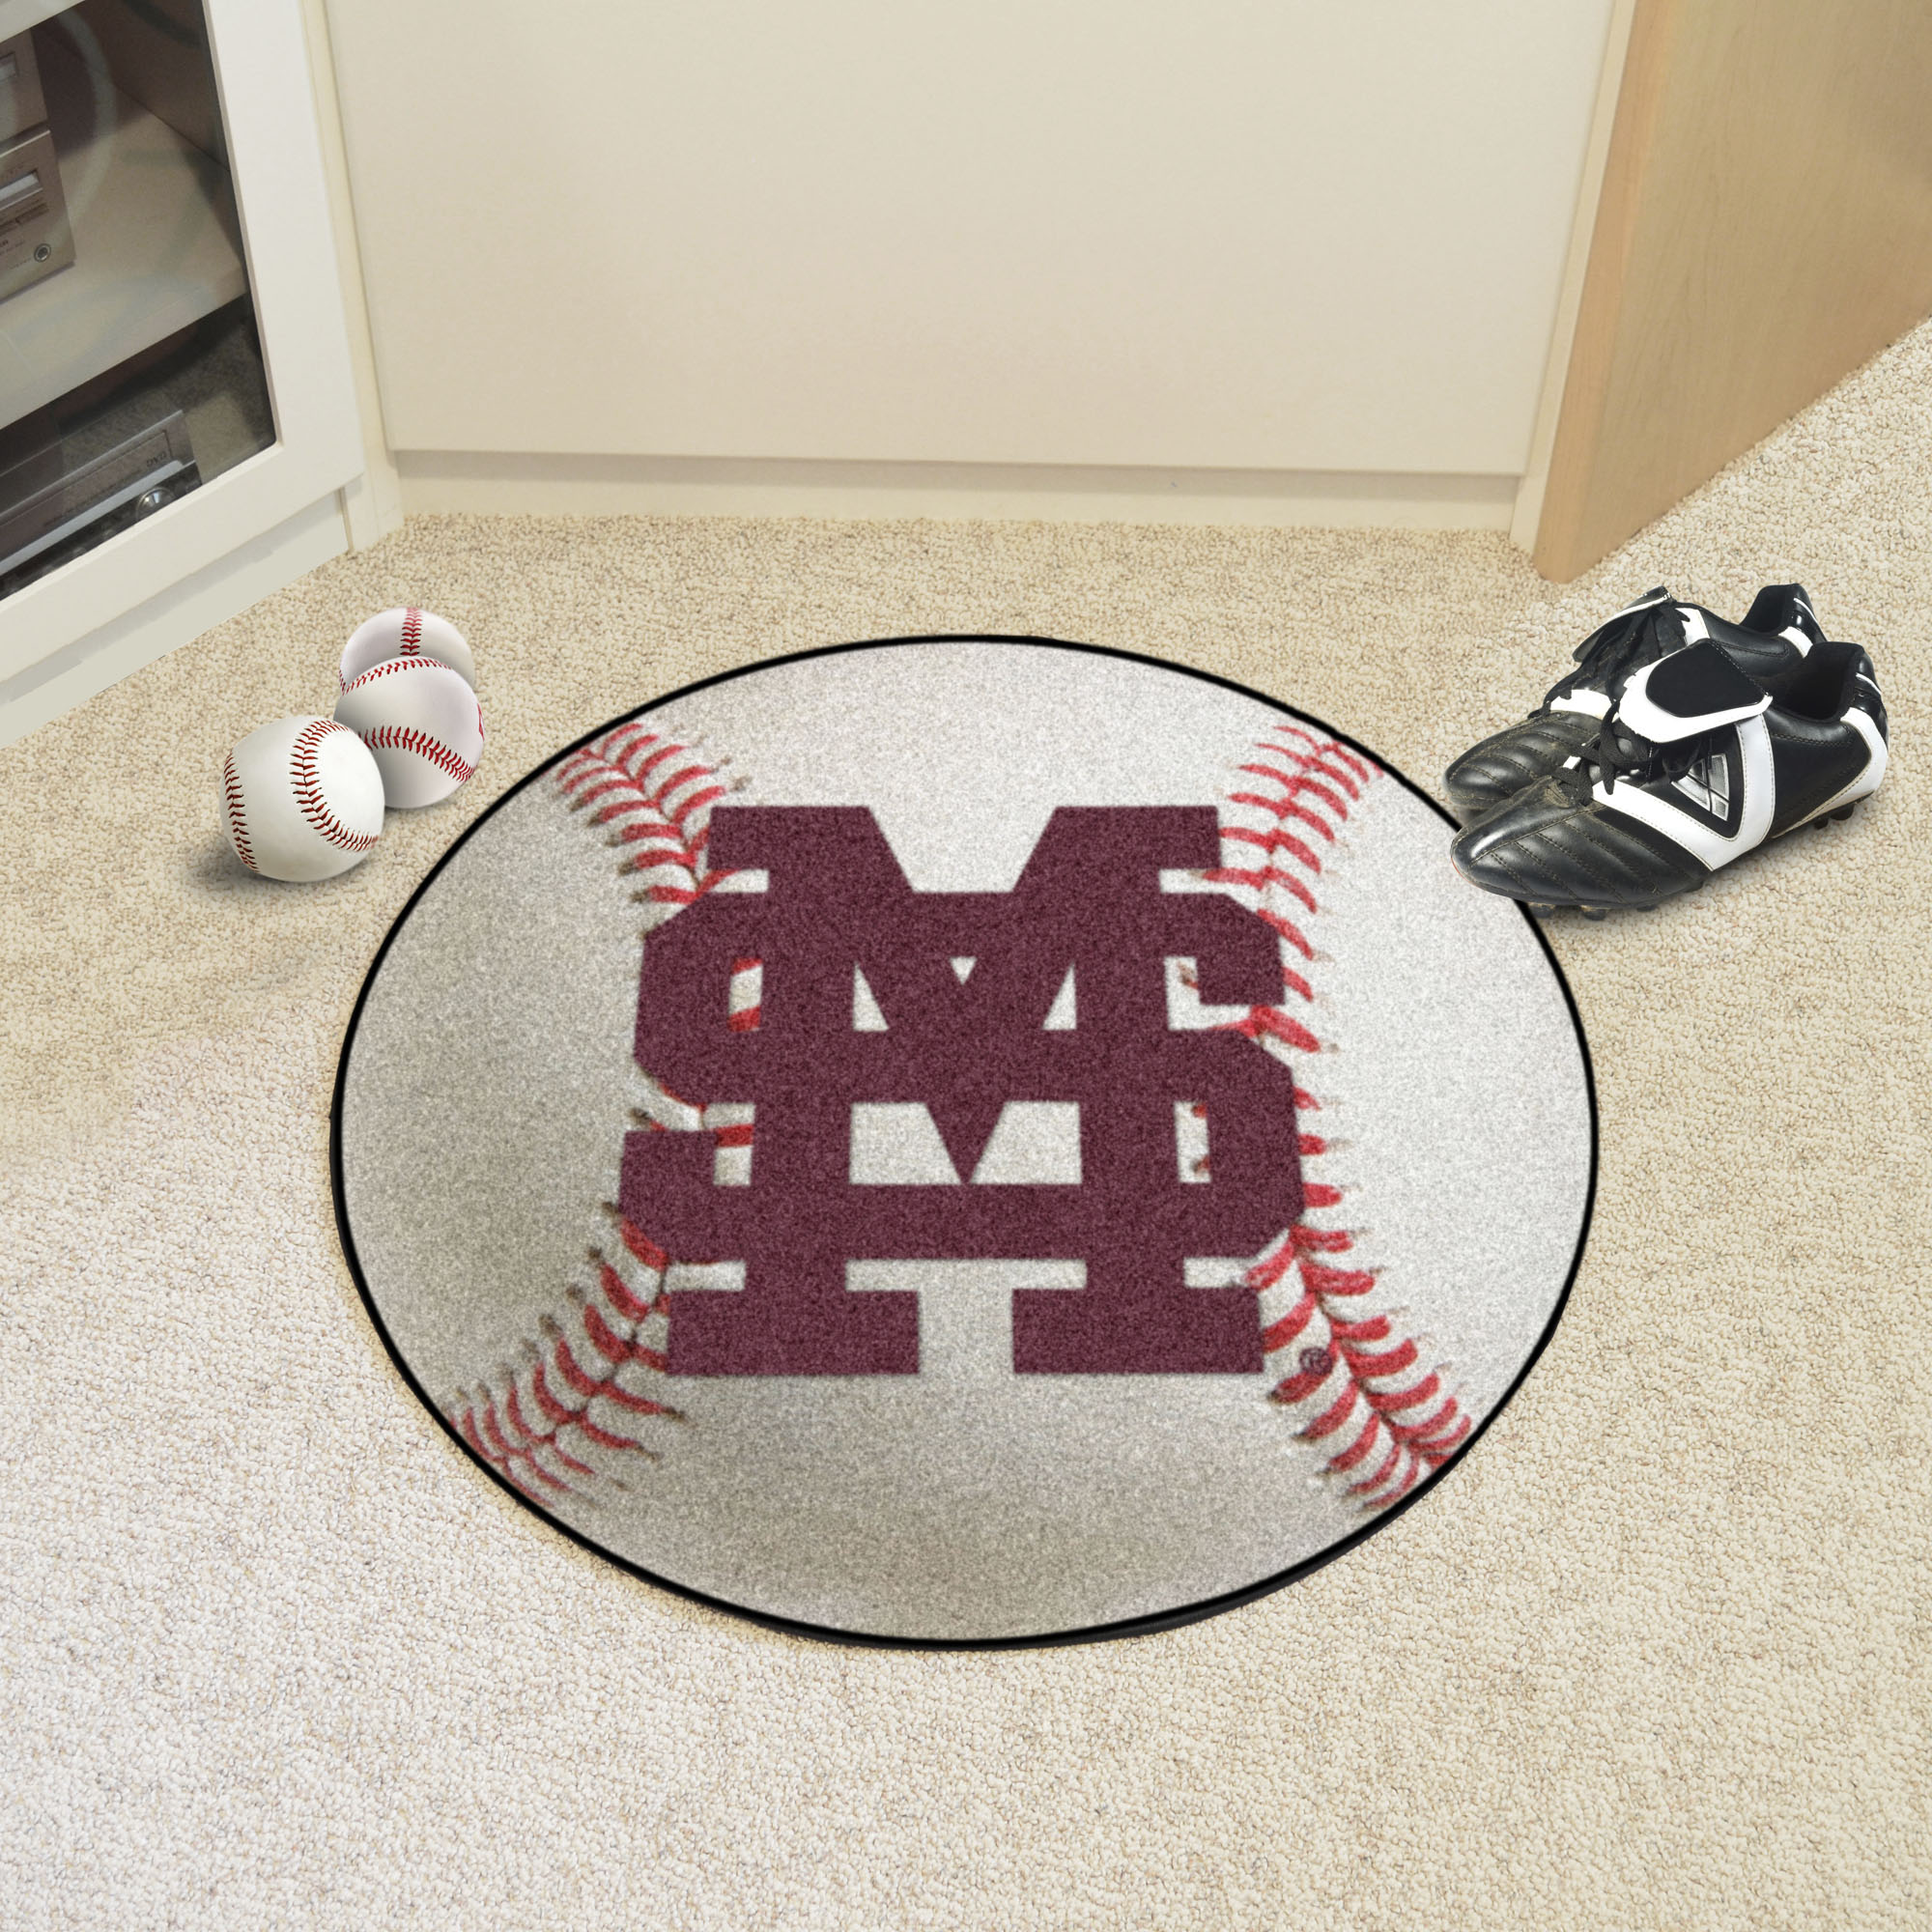 Mississippi State University Ball Shaped Area Rugs (Ball Shaped Area Rugs: Baseball)